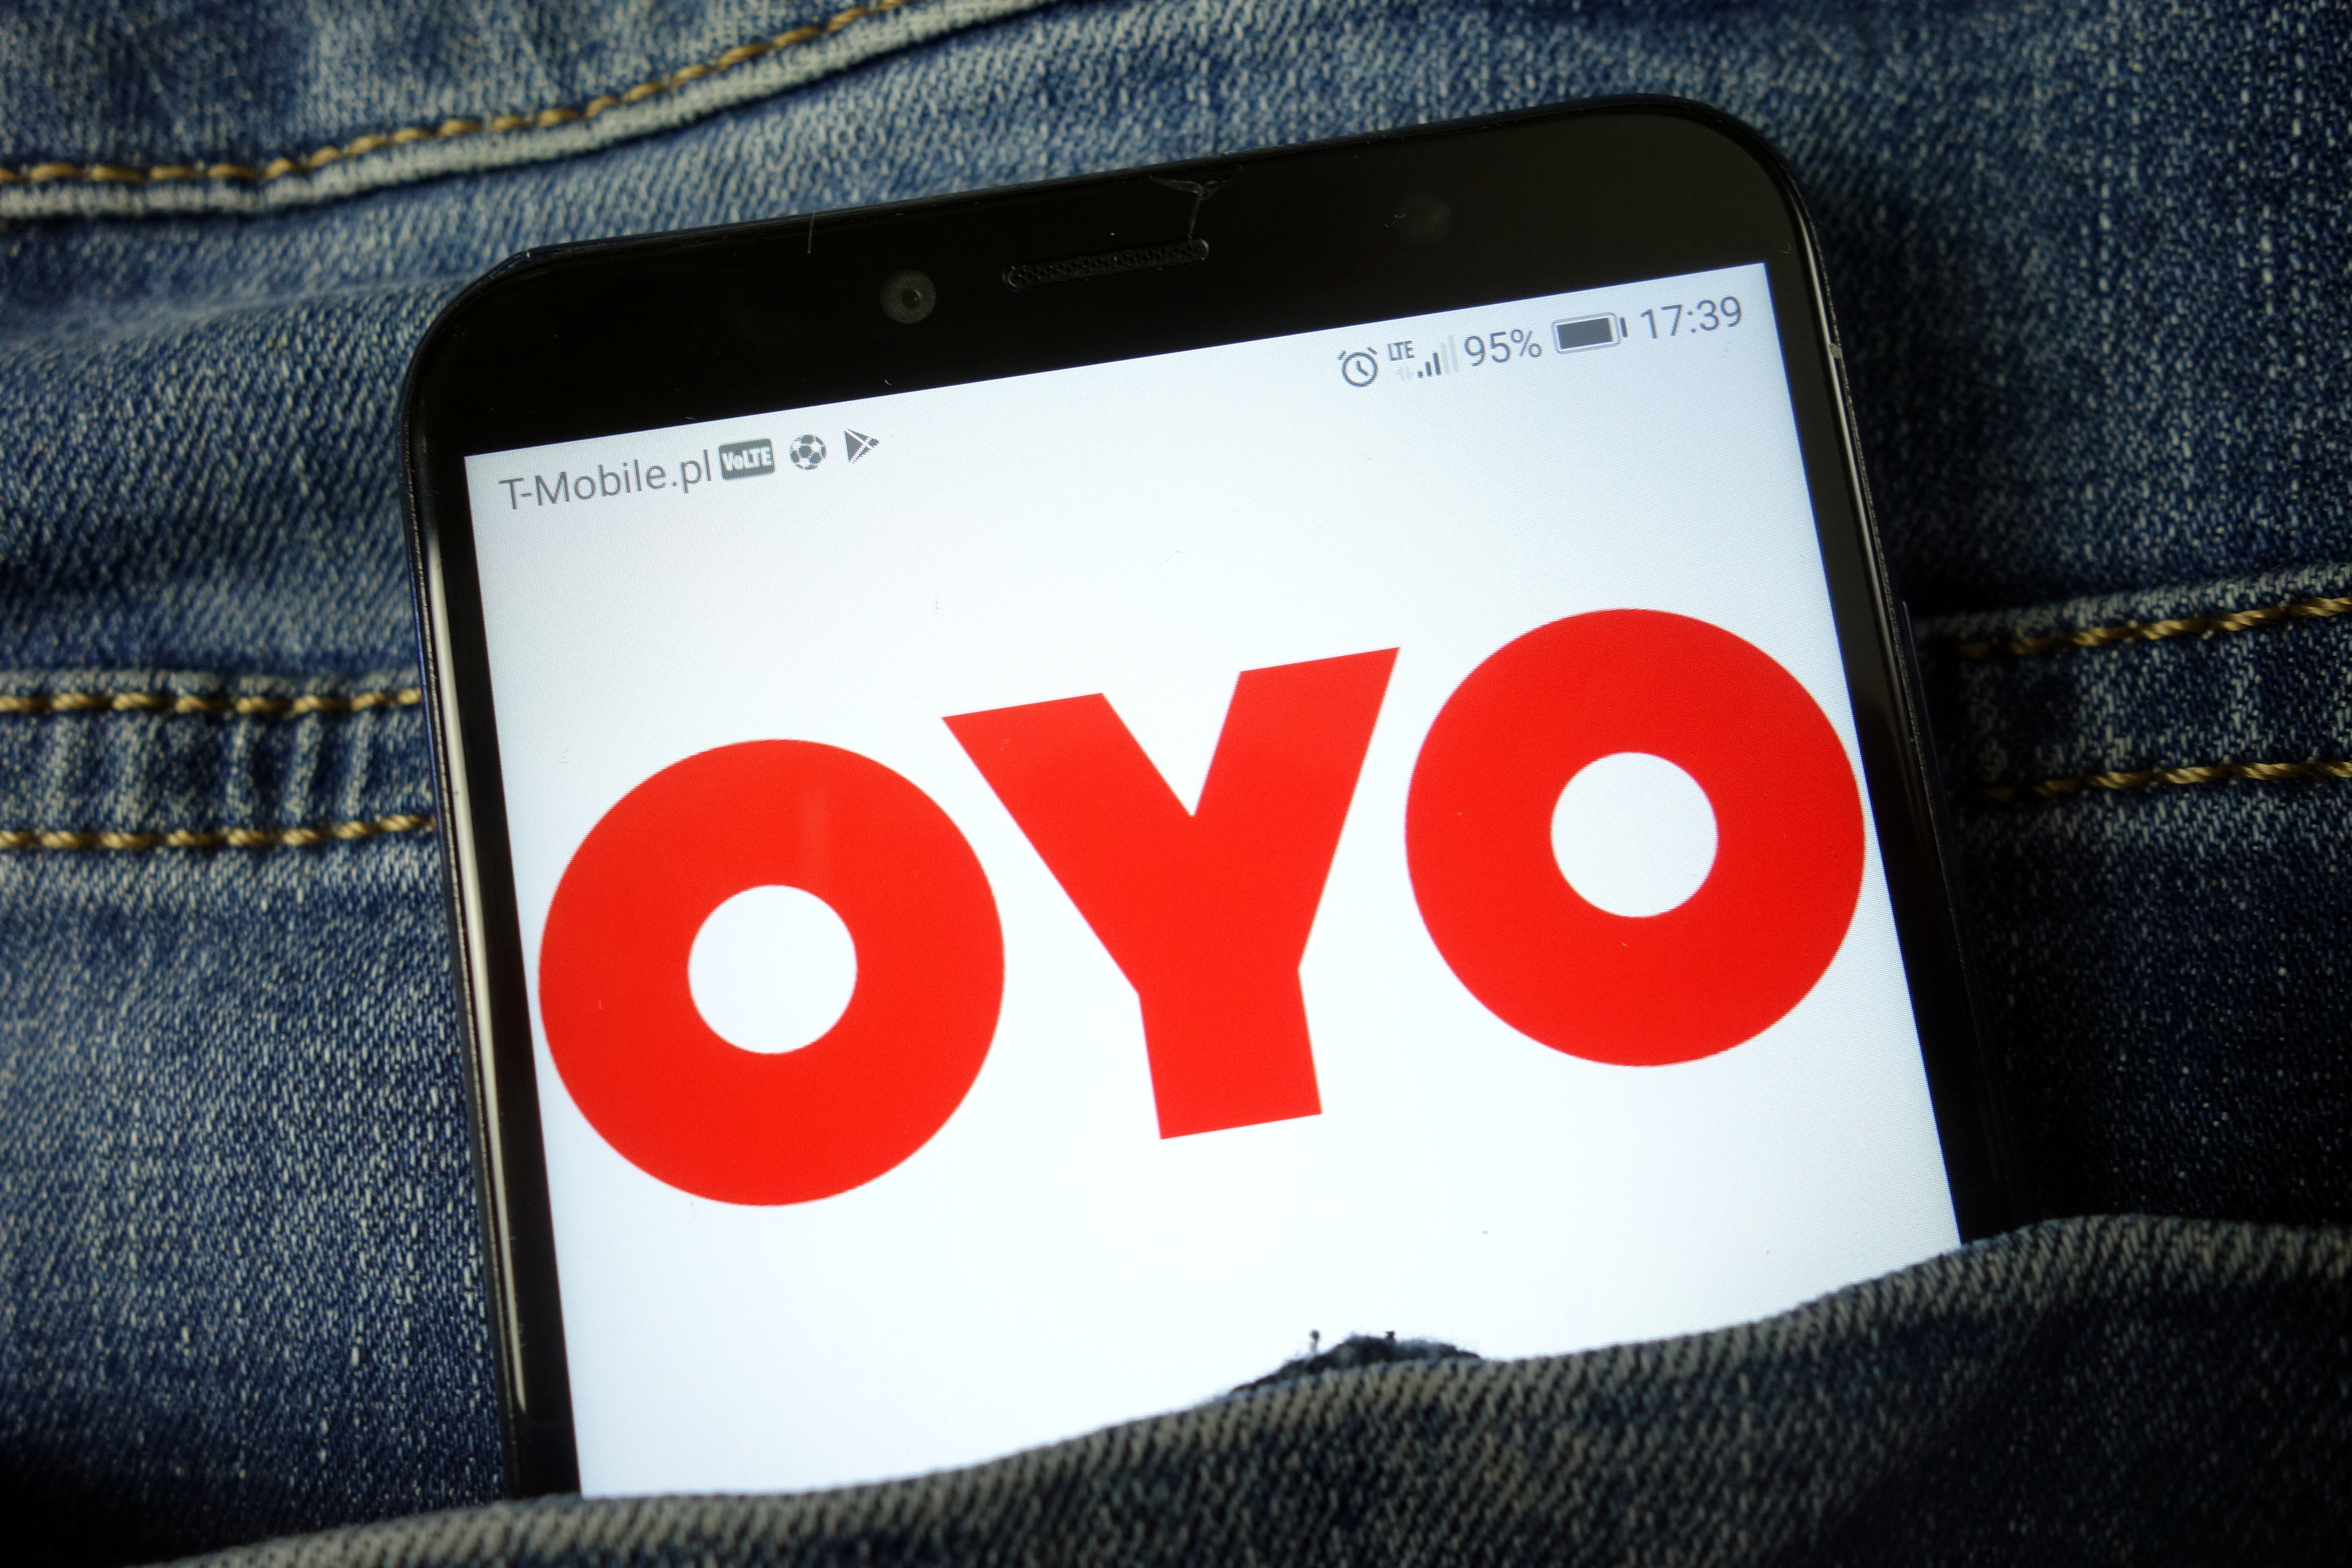 Oyo rolls out welcome mat at Japan’s traditional inns